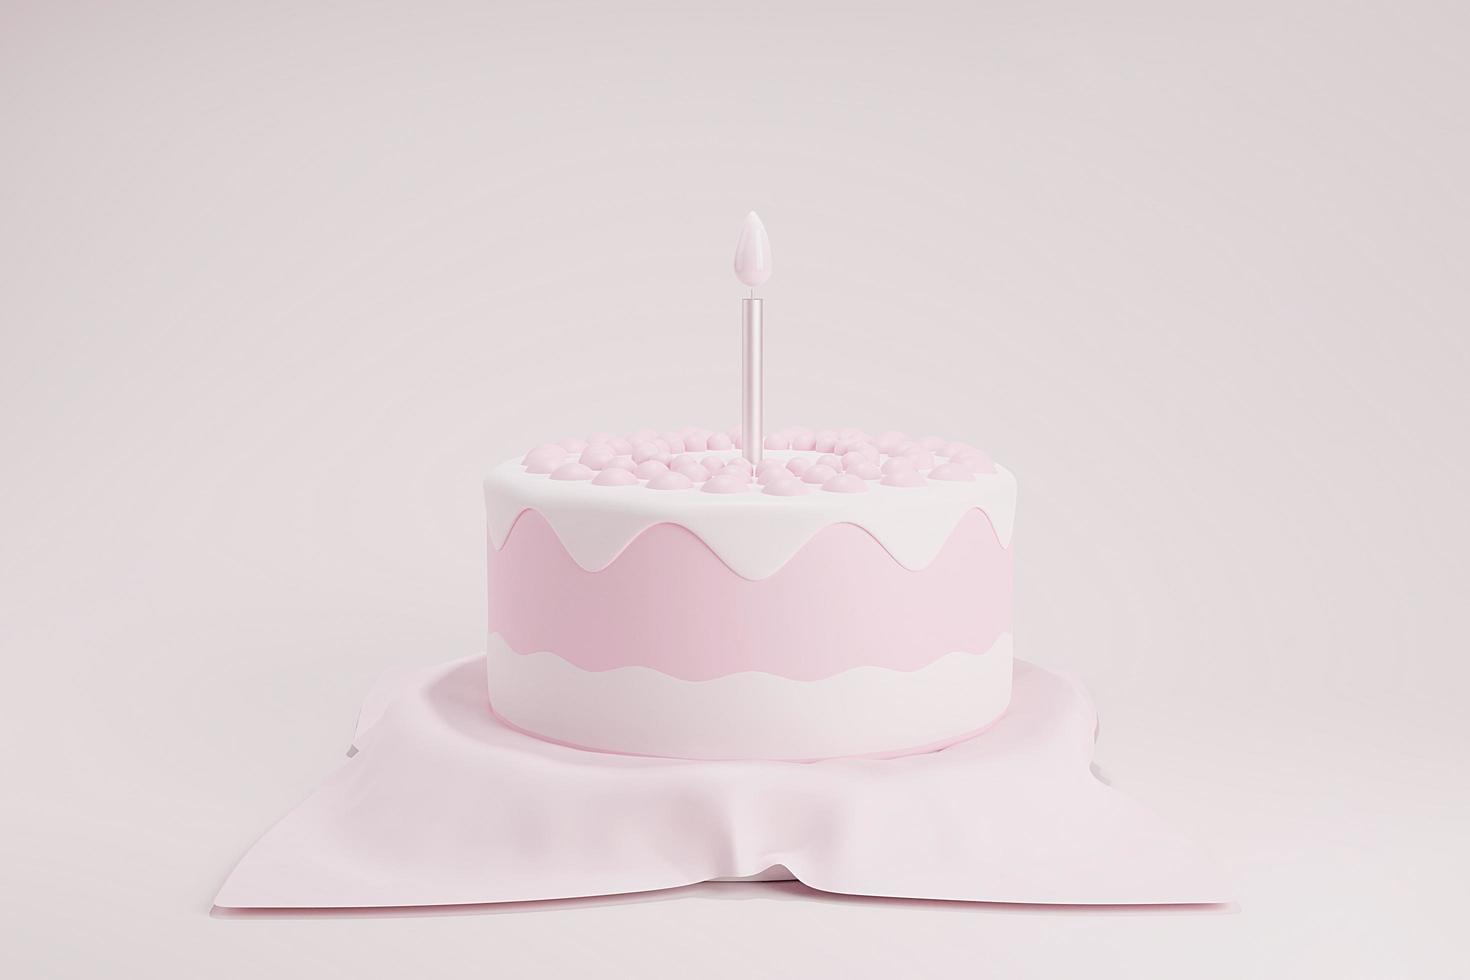 Cute birthday cake 3d rendering illustration soft pink color with a candle on cloth podium, Sweet cake for a surprise birthday, mother's Day, Valentine's Day on a pink background. photo